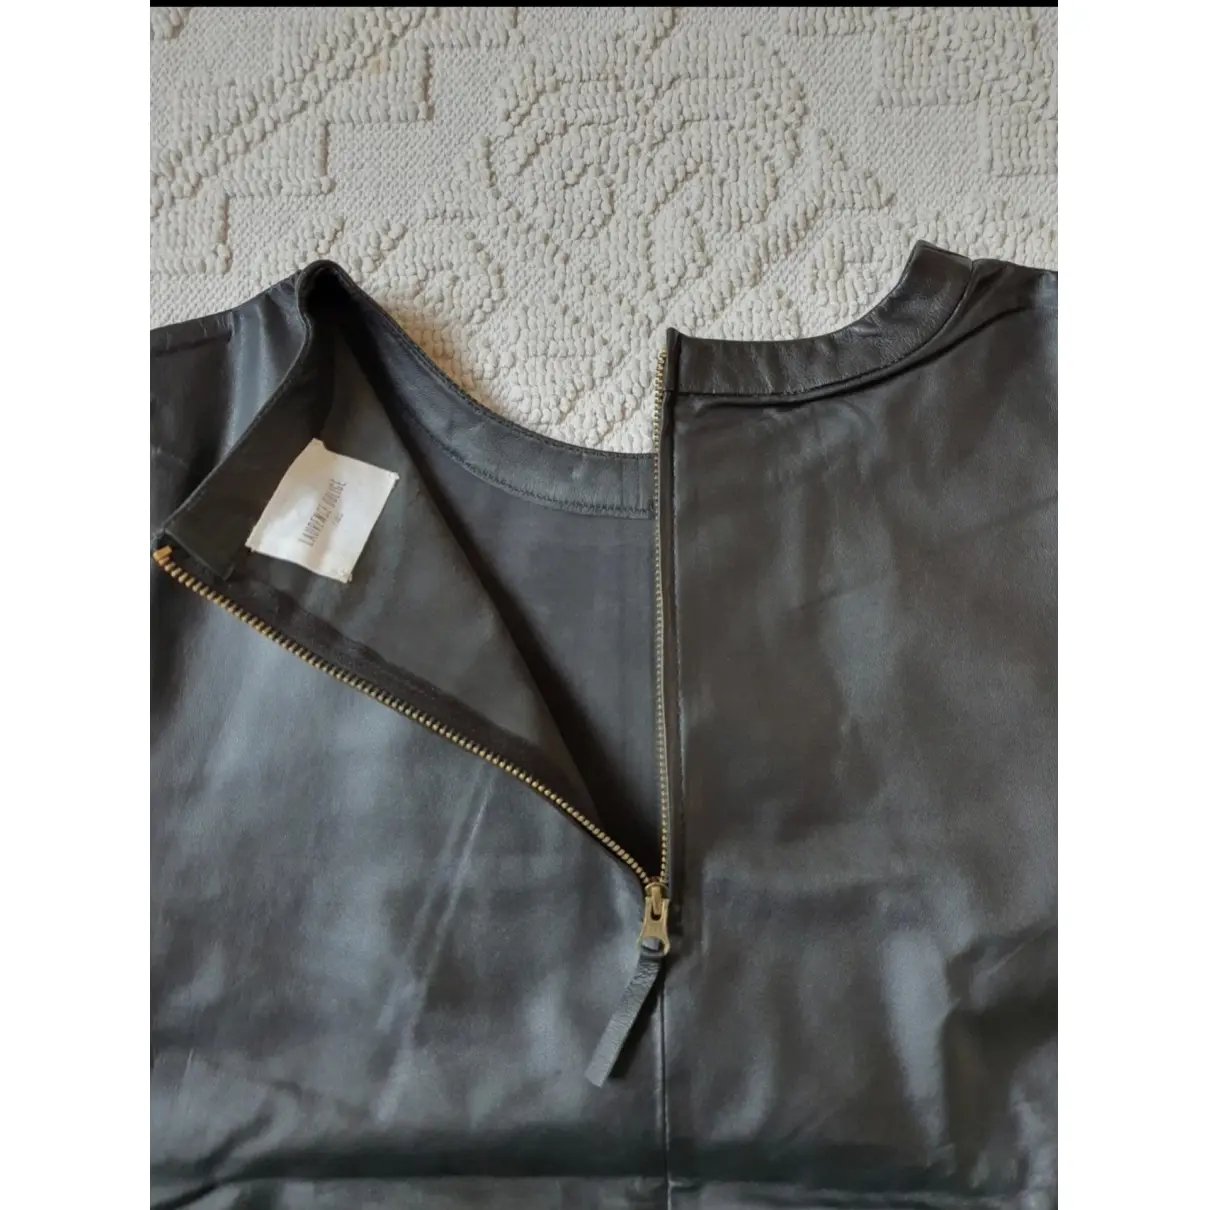 Leather top Laurence Dolige